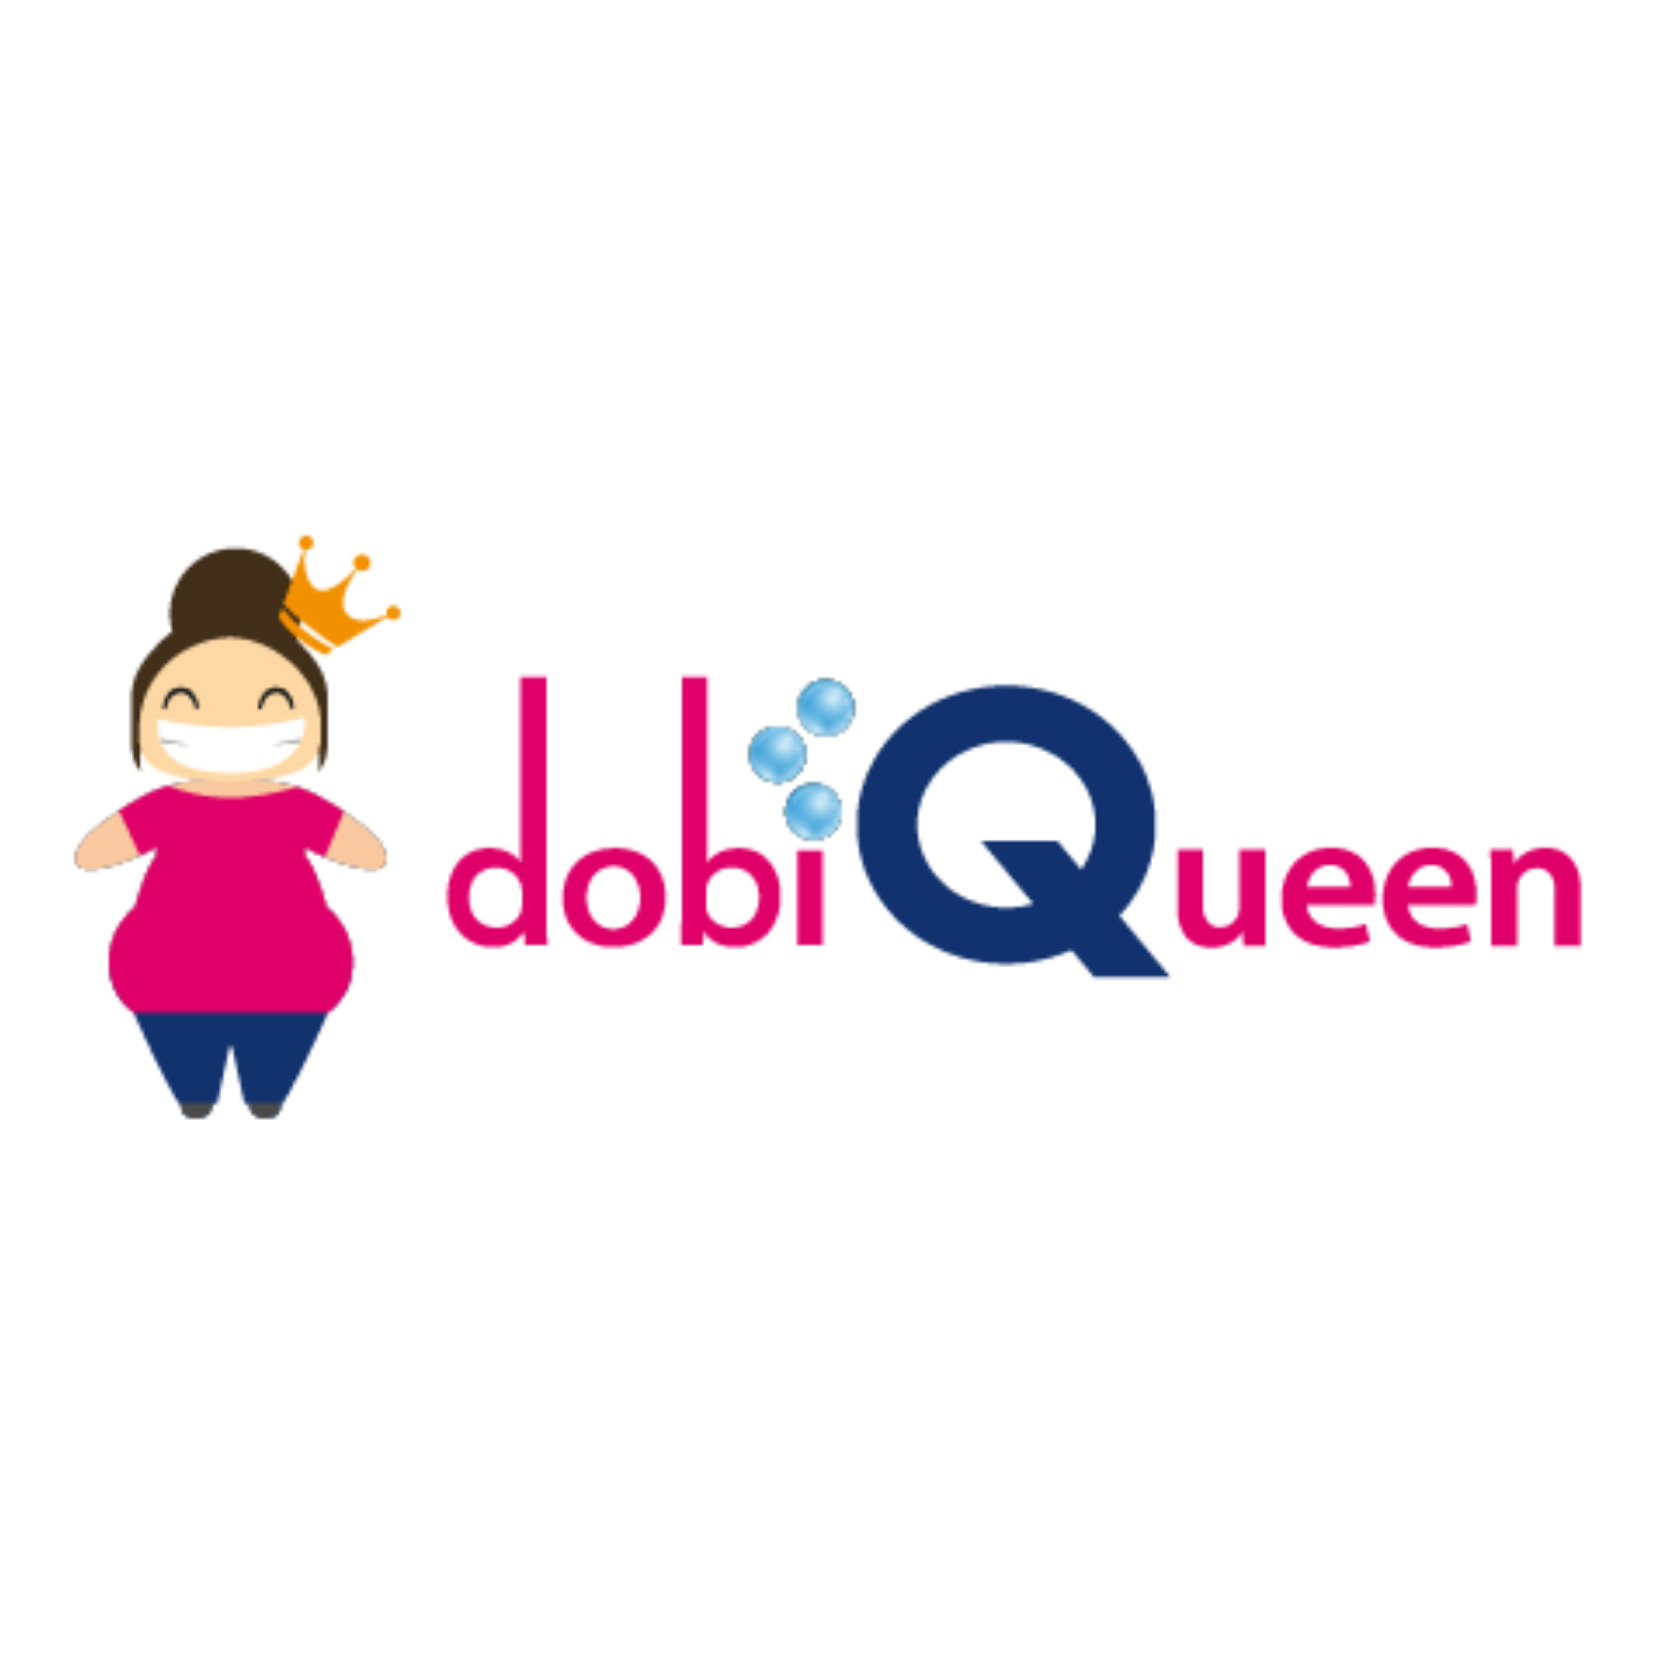 dobiqueen Logo - Suppagood Public Relations Malaysia